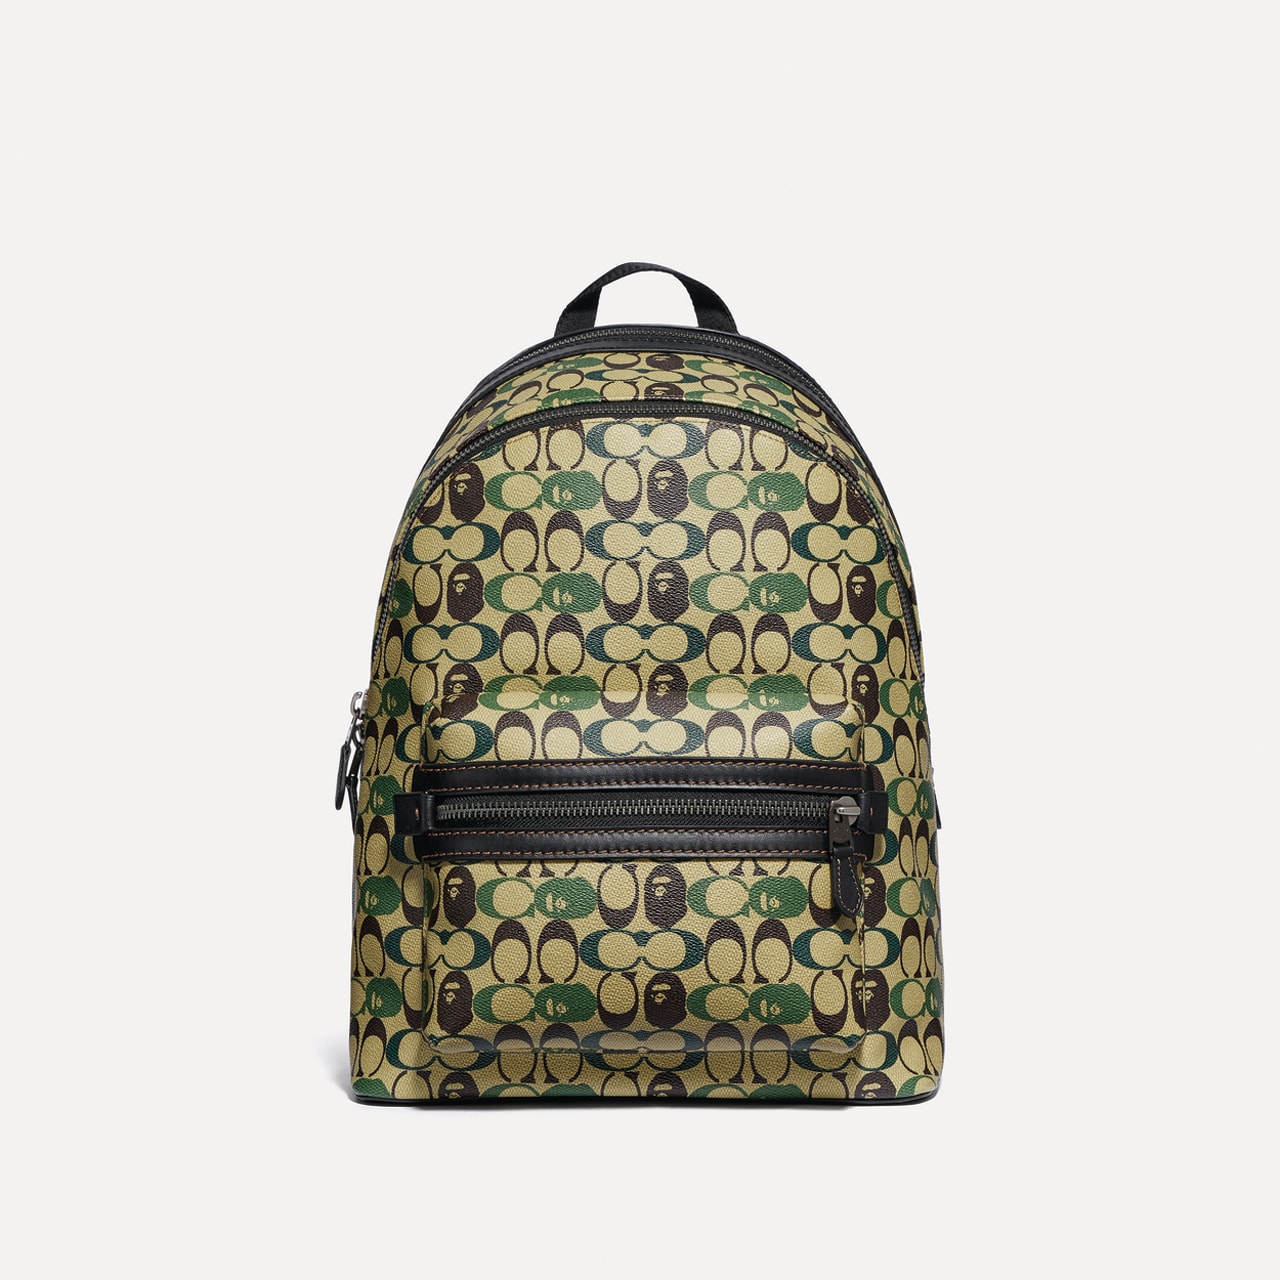 BAPE x Coach SS20 Full Collection and Lookbook | HYPEBEAST